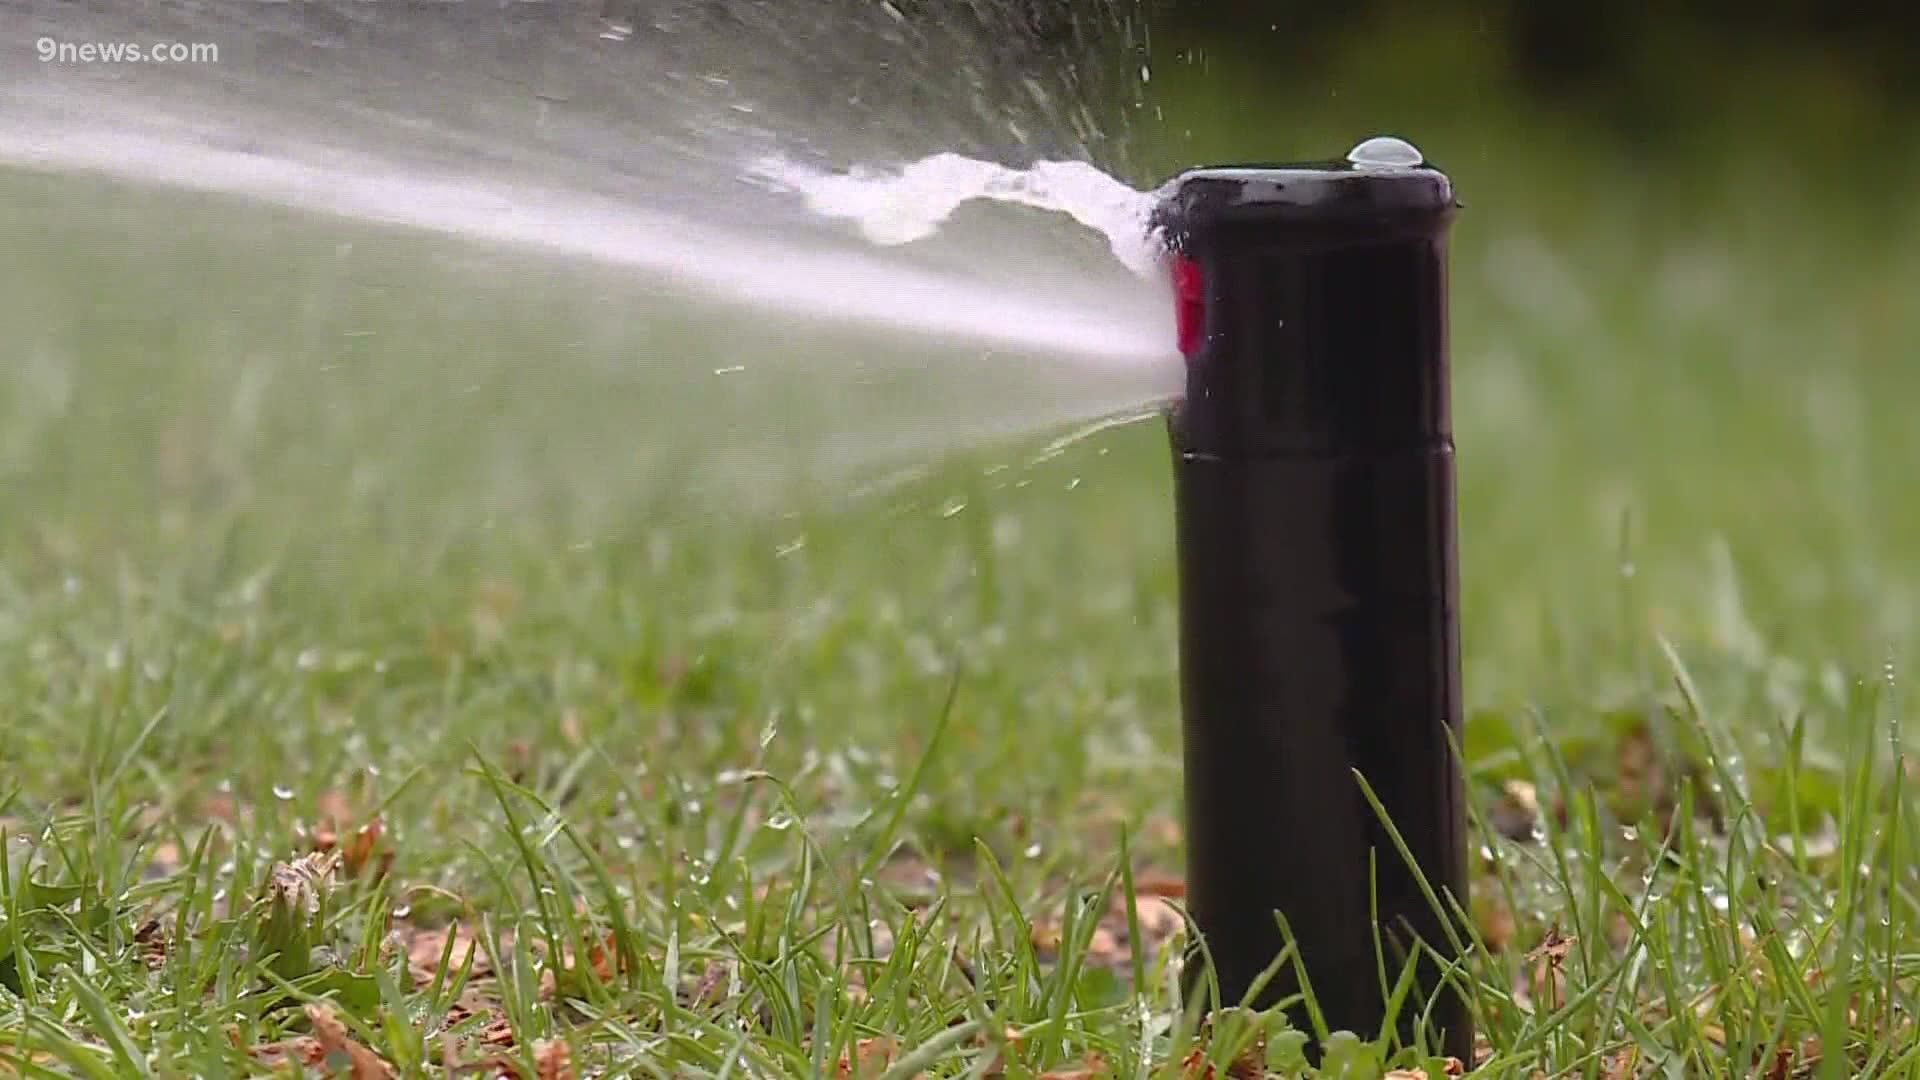 A change in temperatures can cause damage to your sprinkler system. Jon Glasgow has tips on how to protect your lawn and home.